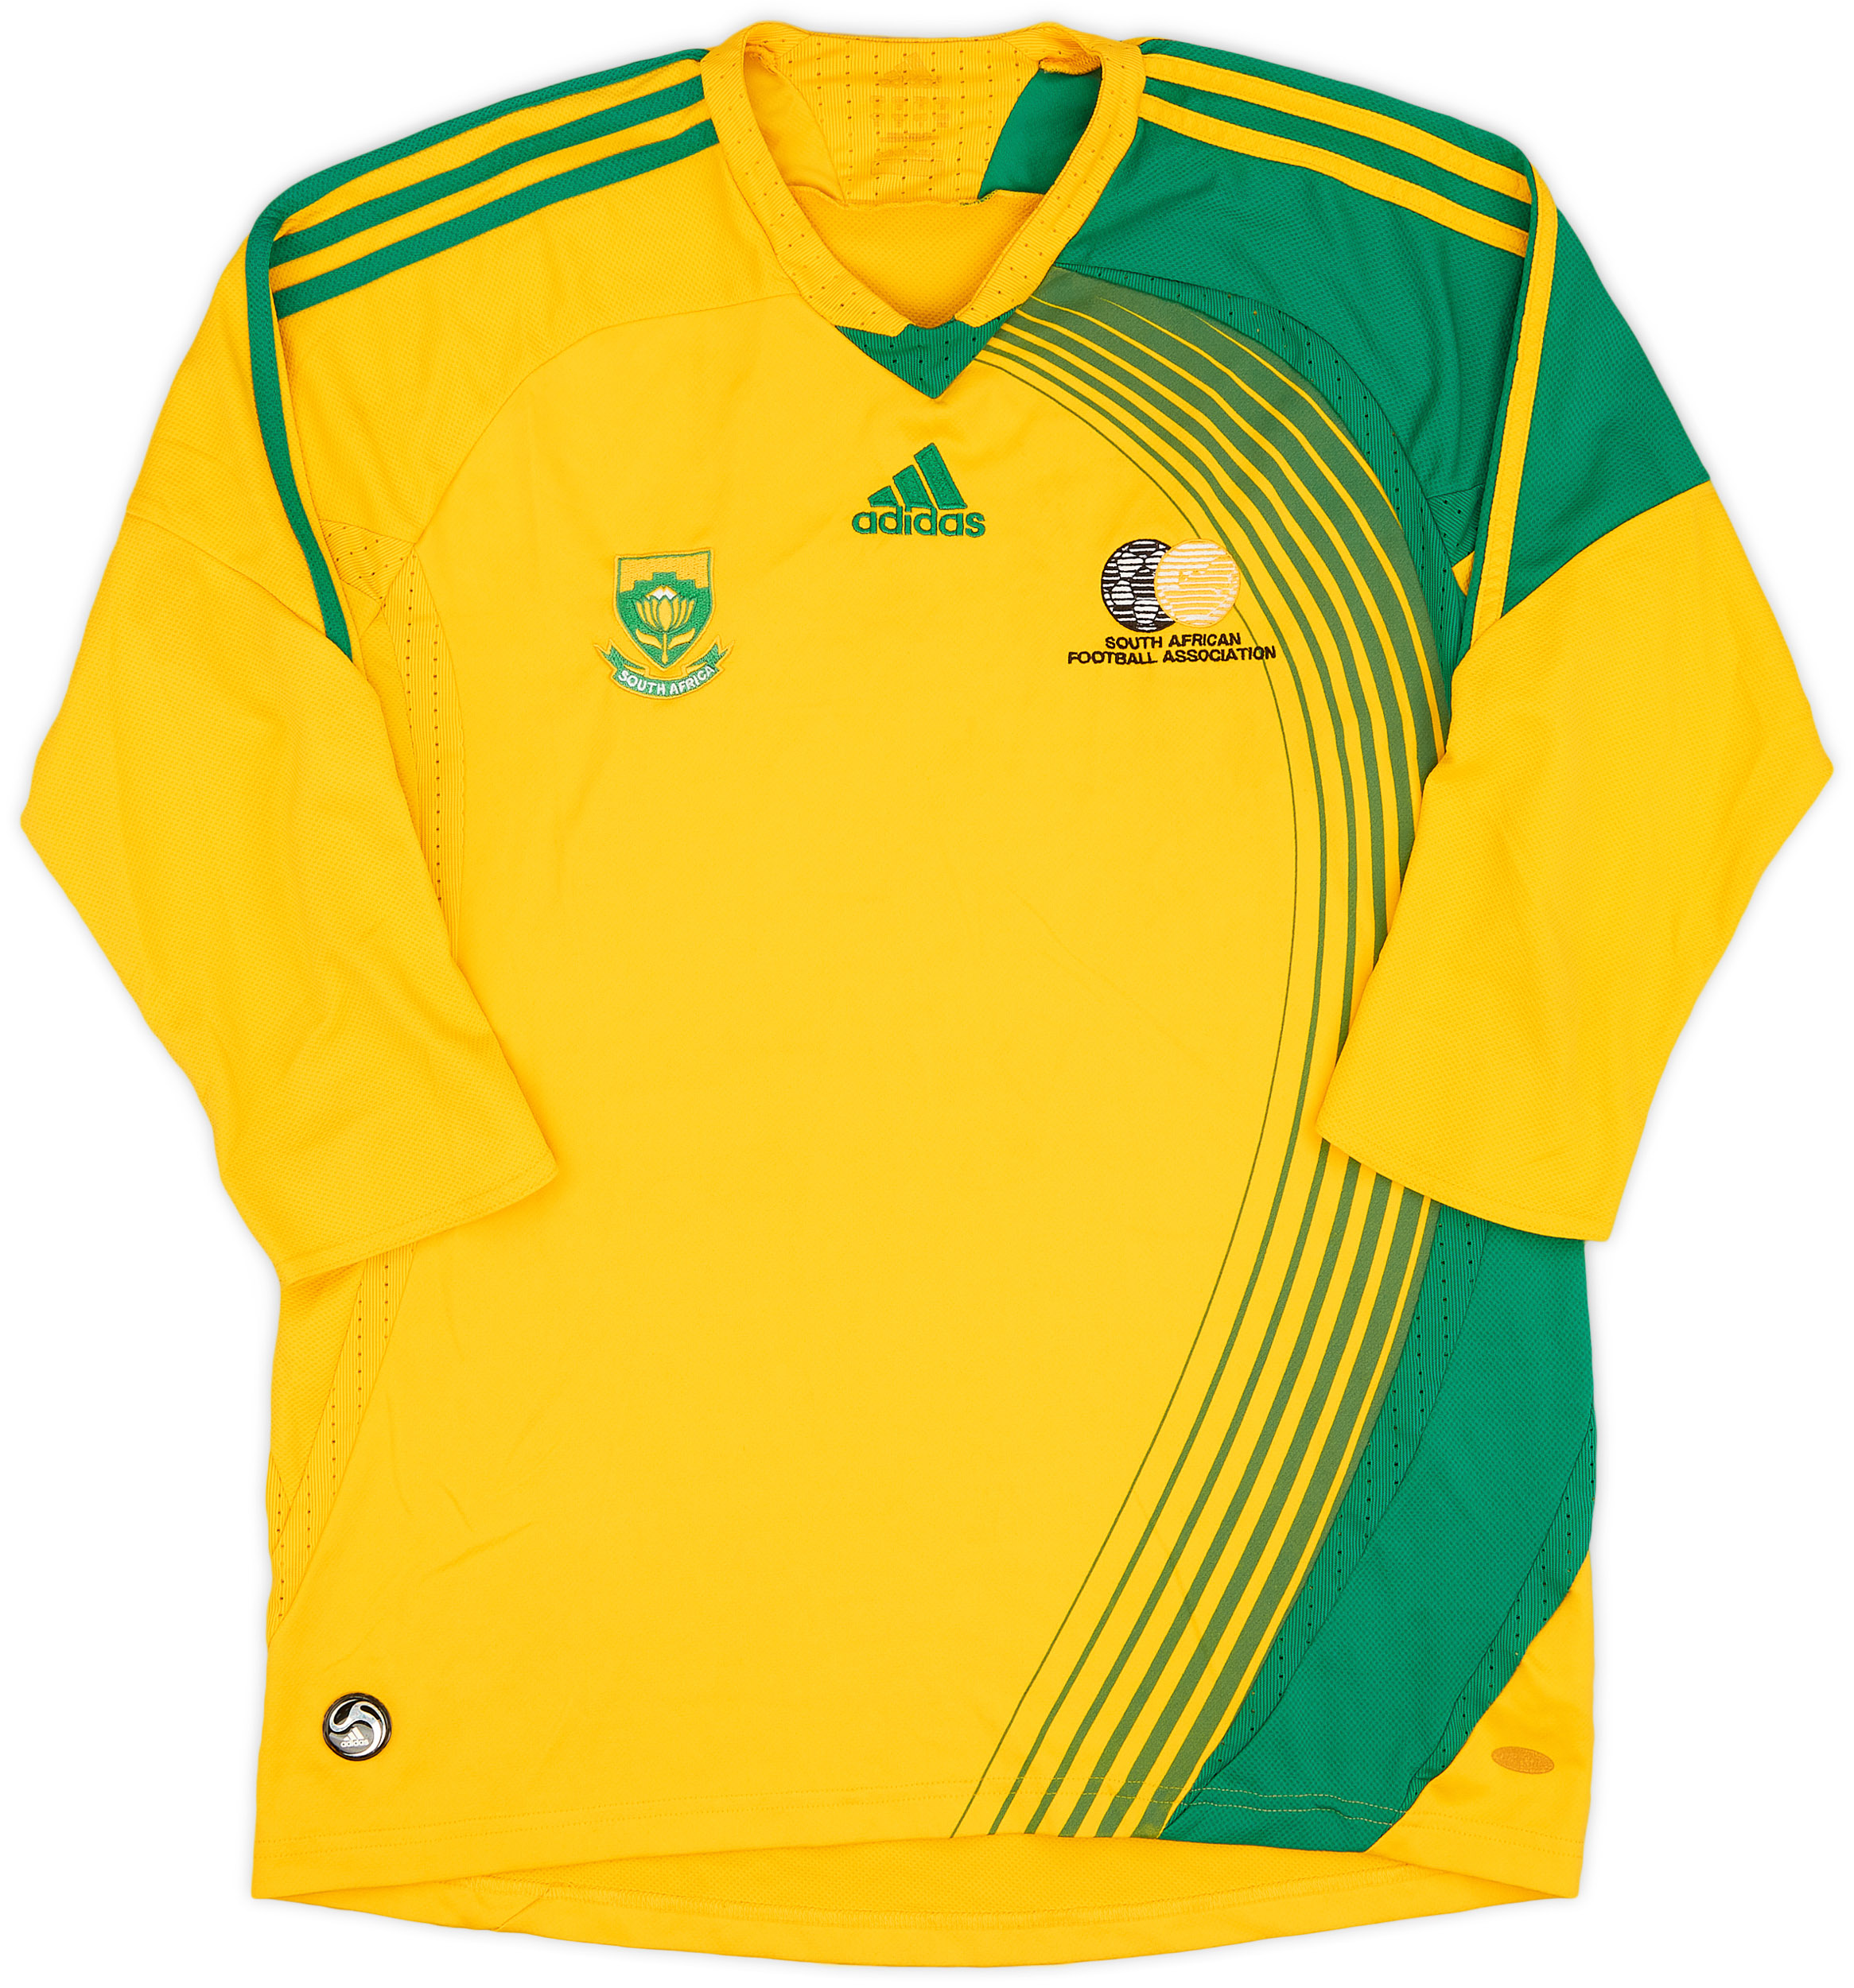 2007-09 South Africa Home Shirt - 8/10 - ()